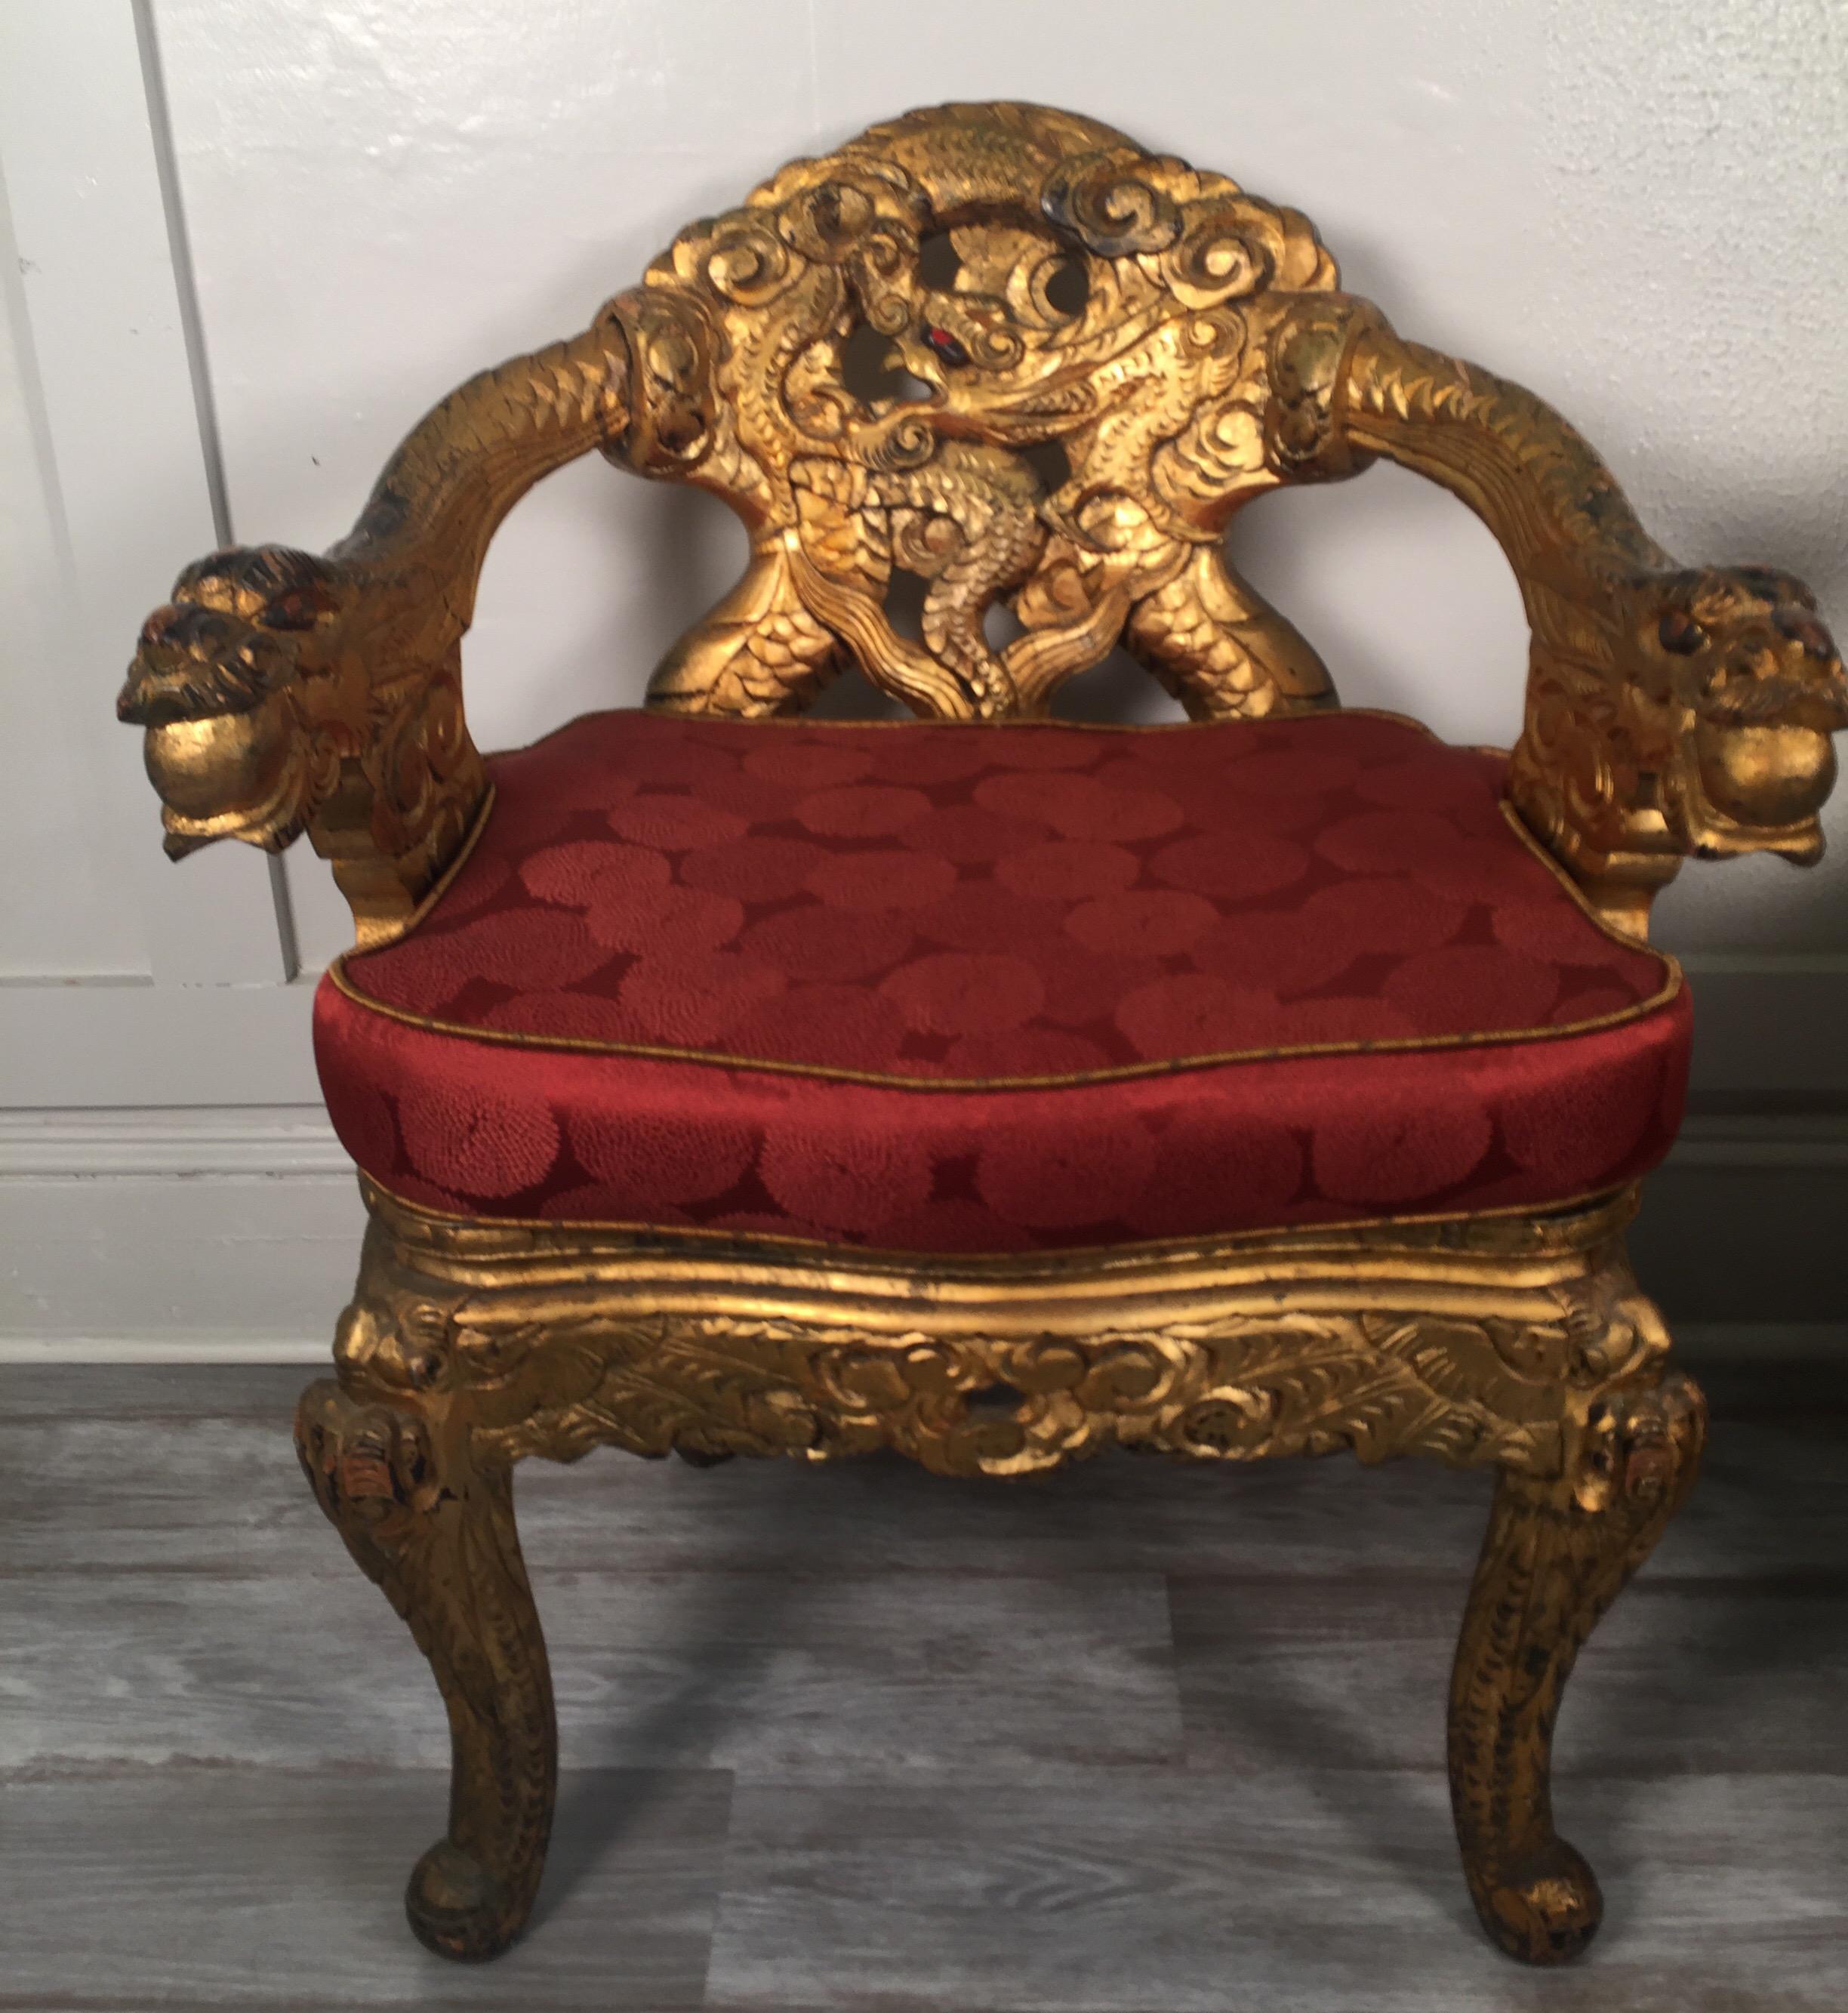 Pair of Hand Carved Gilt Japanese Chairs with Silk Cushions (Japanisch)